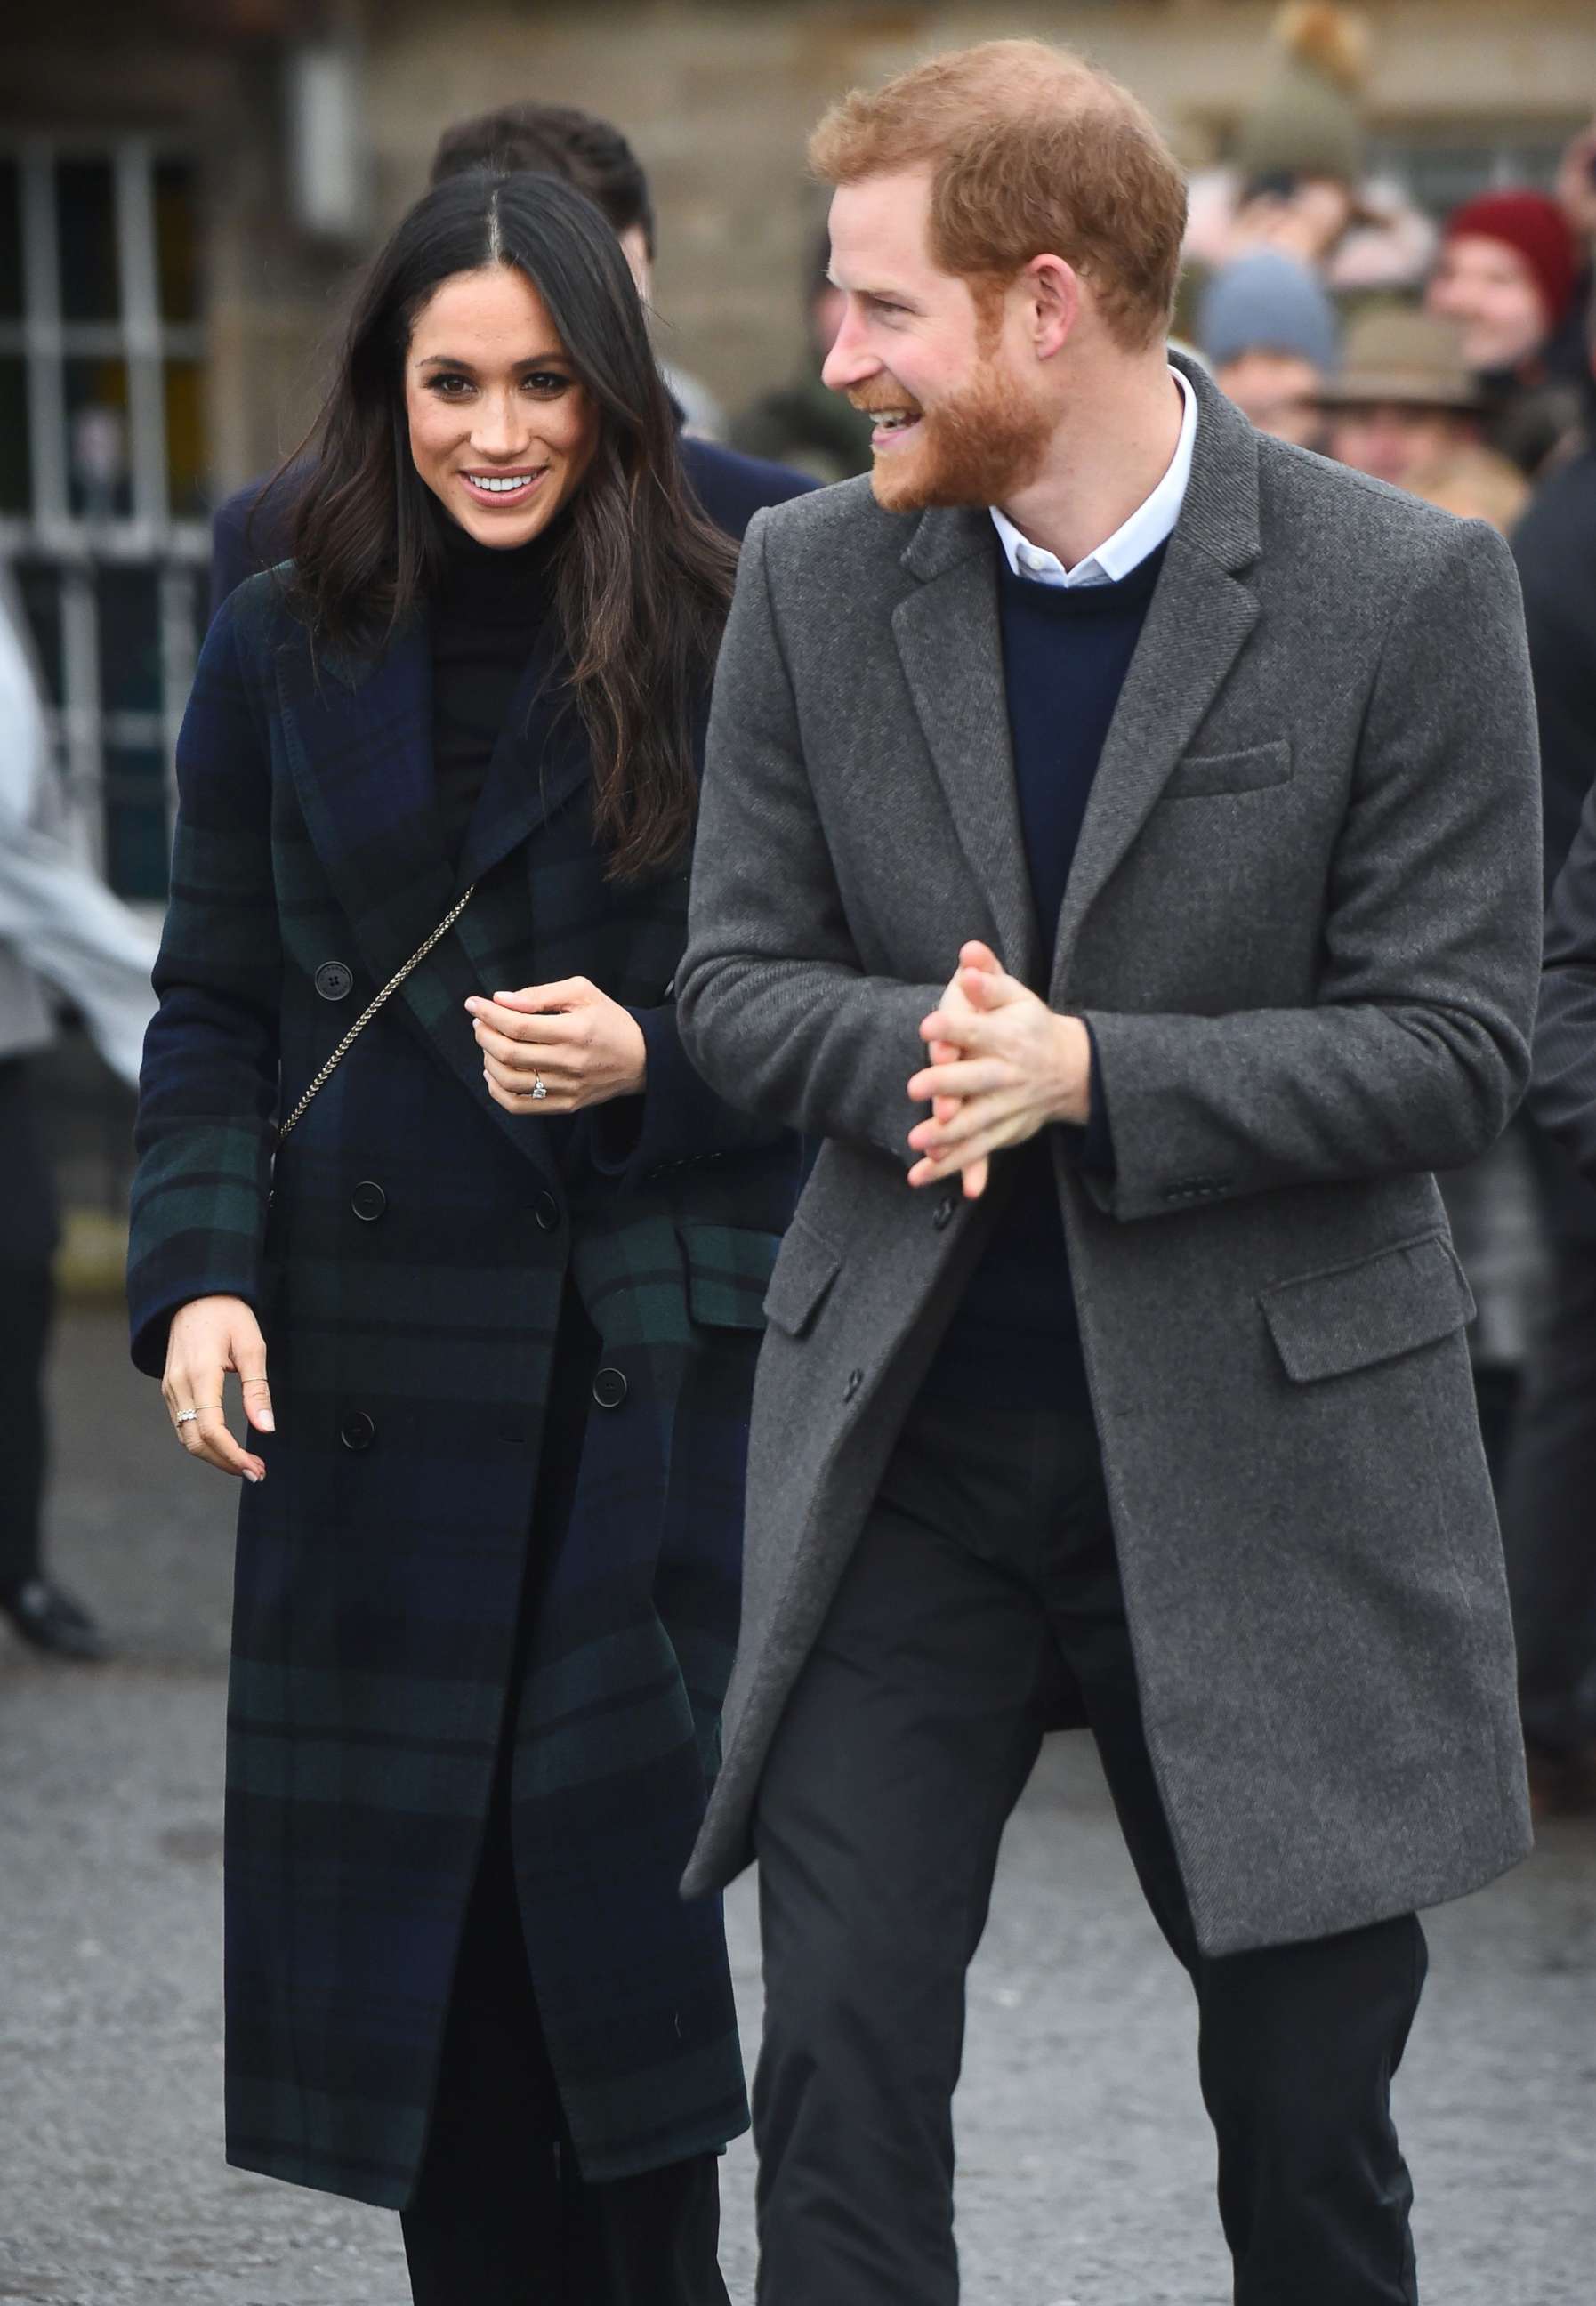 PHOTO: Britain's Prince Harry and his fiancee Meghan Markle walk on the Esplanade at Edinburgh Castle, during a visit to Scotland, Feb. 13, 2018.